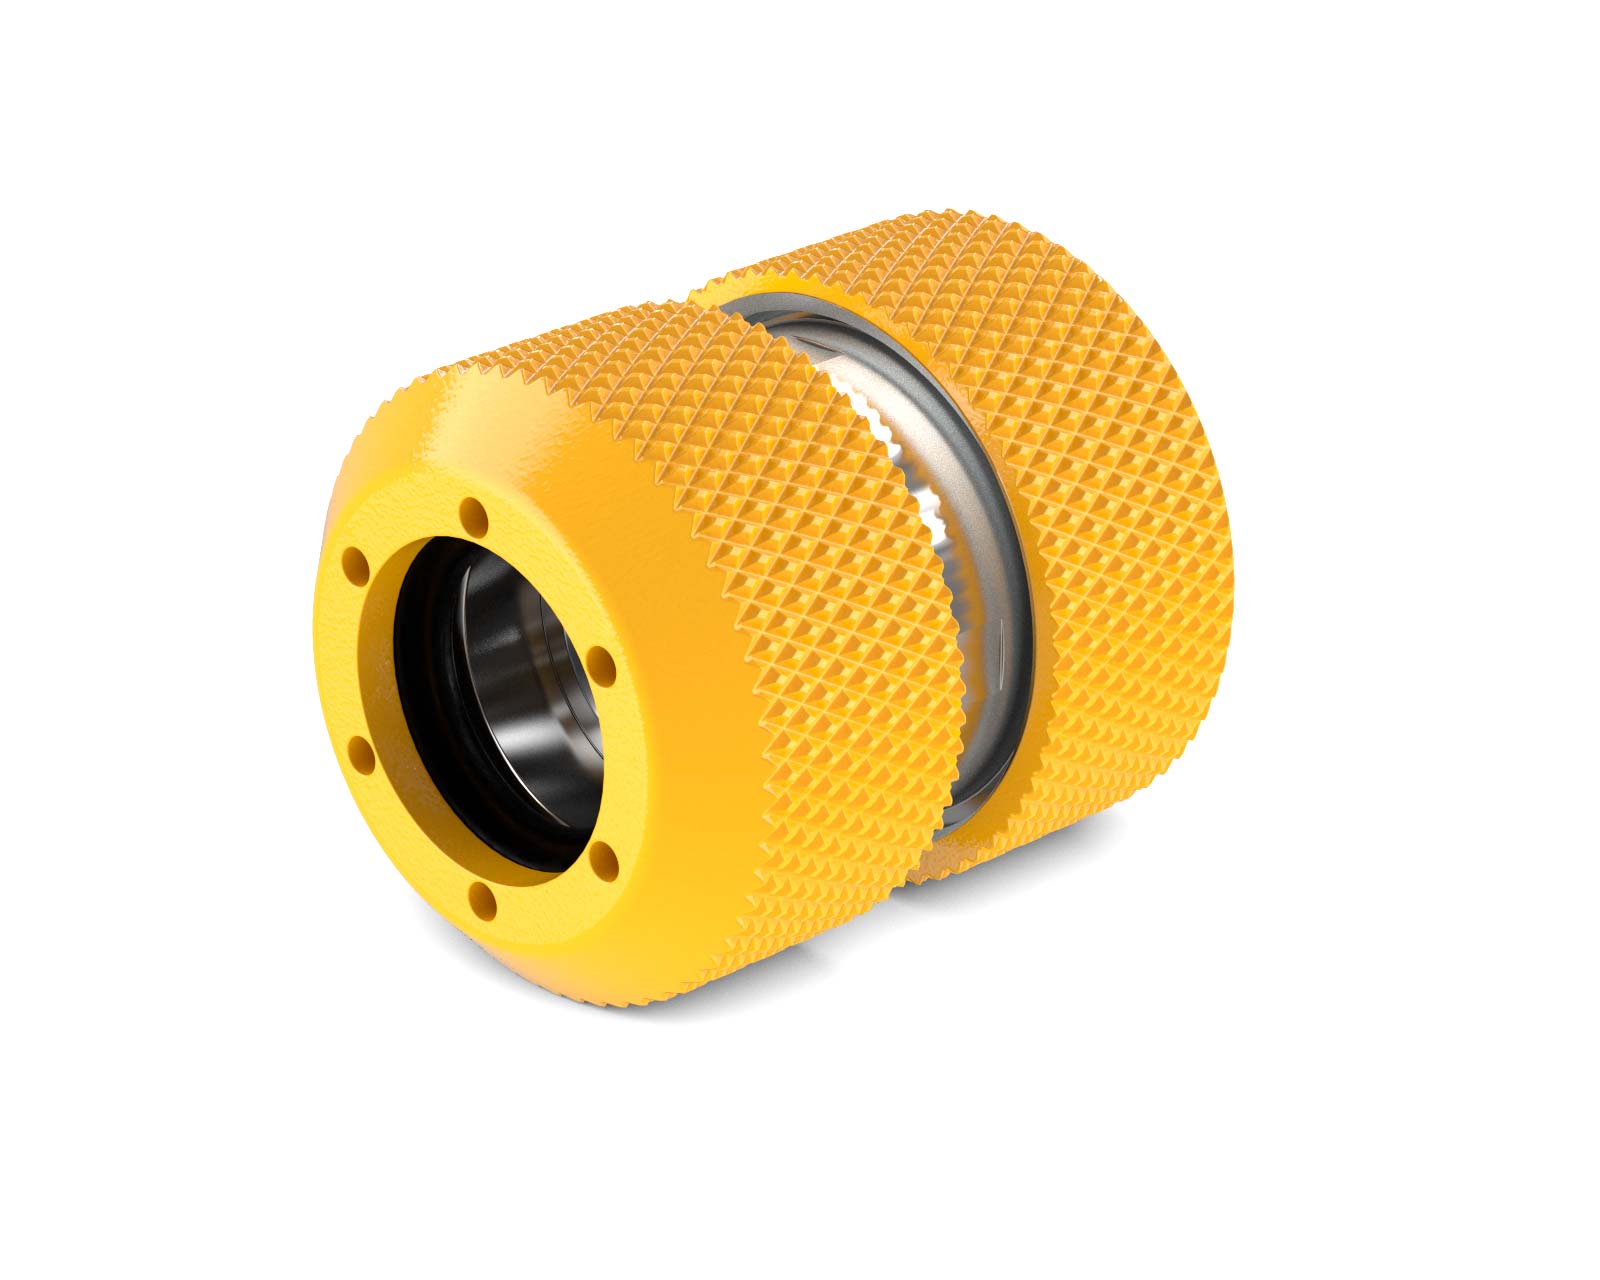 PrimoChill 1/2in. Rigid RevolverSX Series Coupler Fitting - PrimoChill - KEEPING IT COOL Yellow